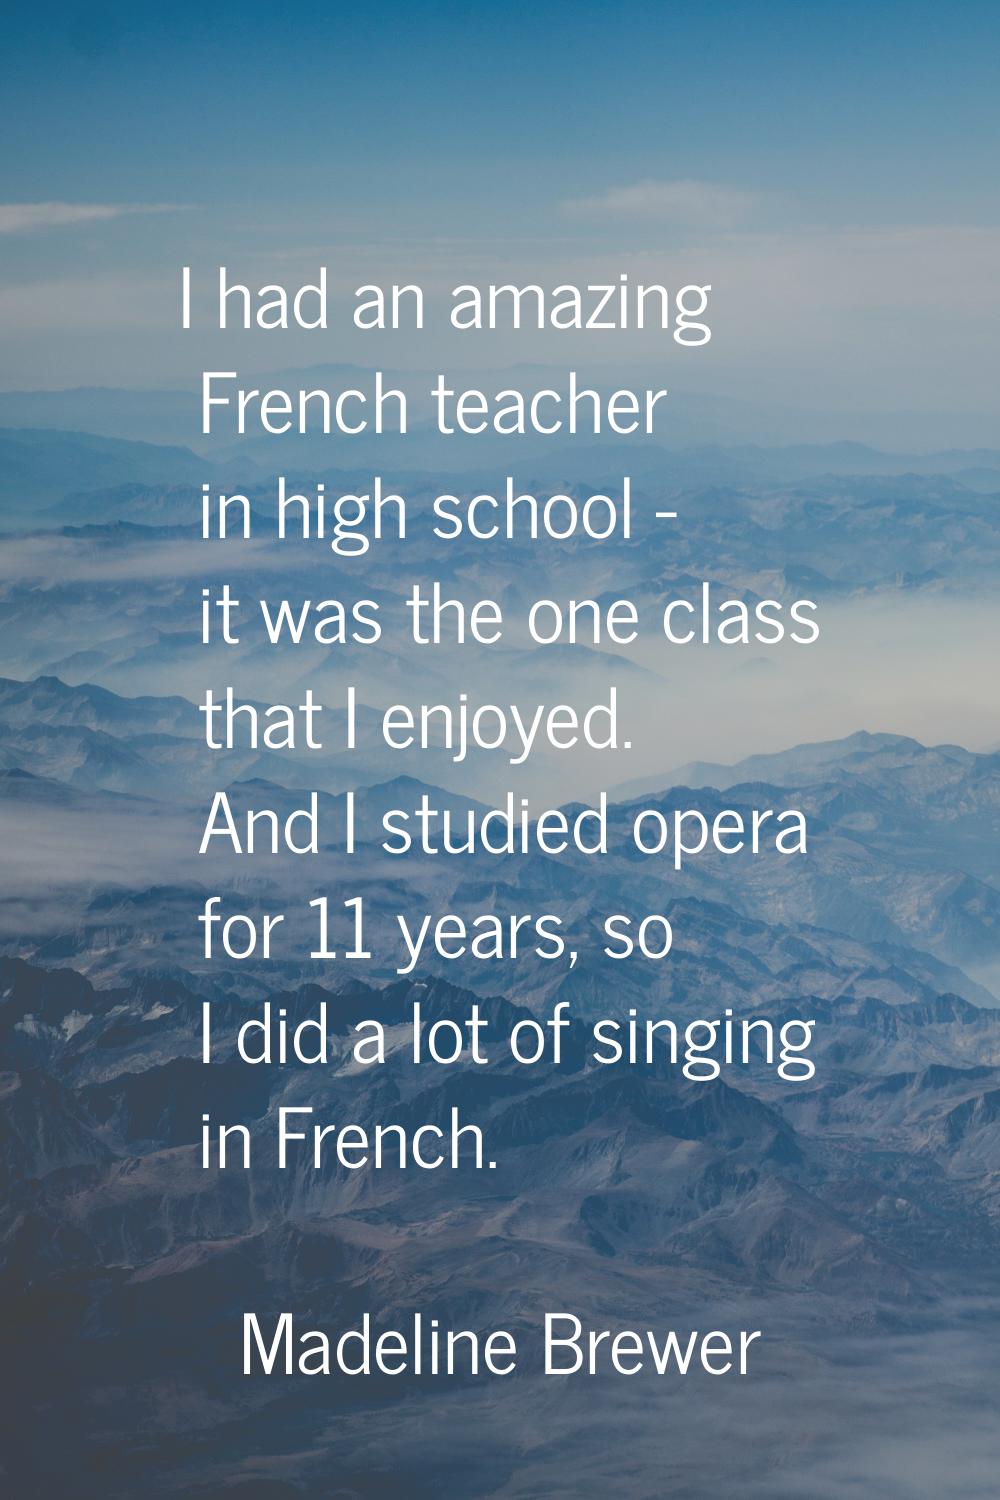 I had an amazing French teacher in high school - it was the one class that I enjoyed. And I studied